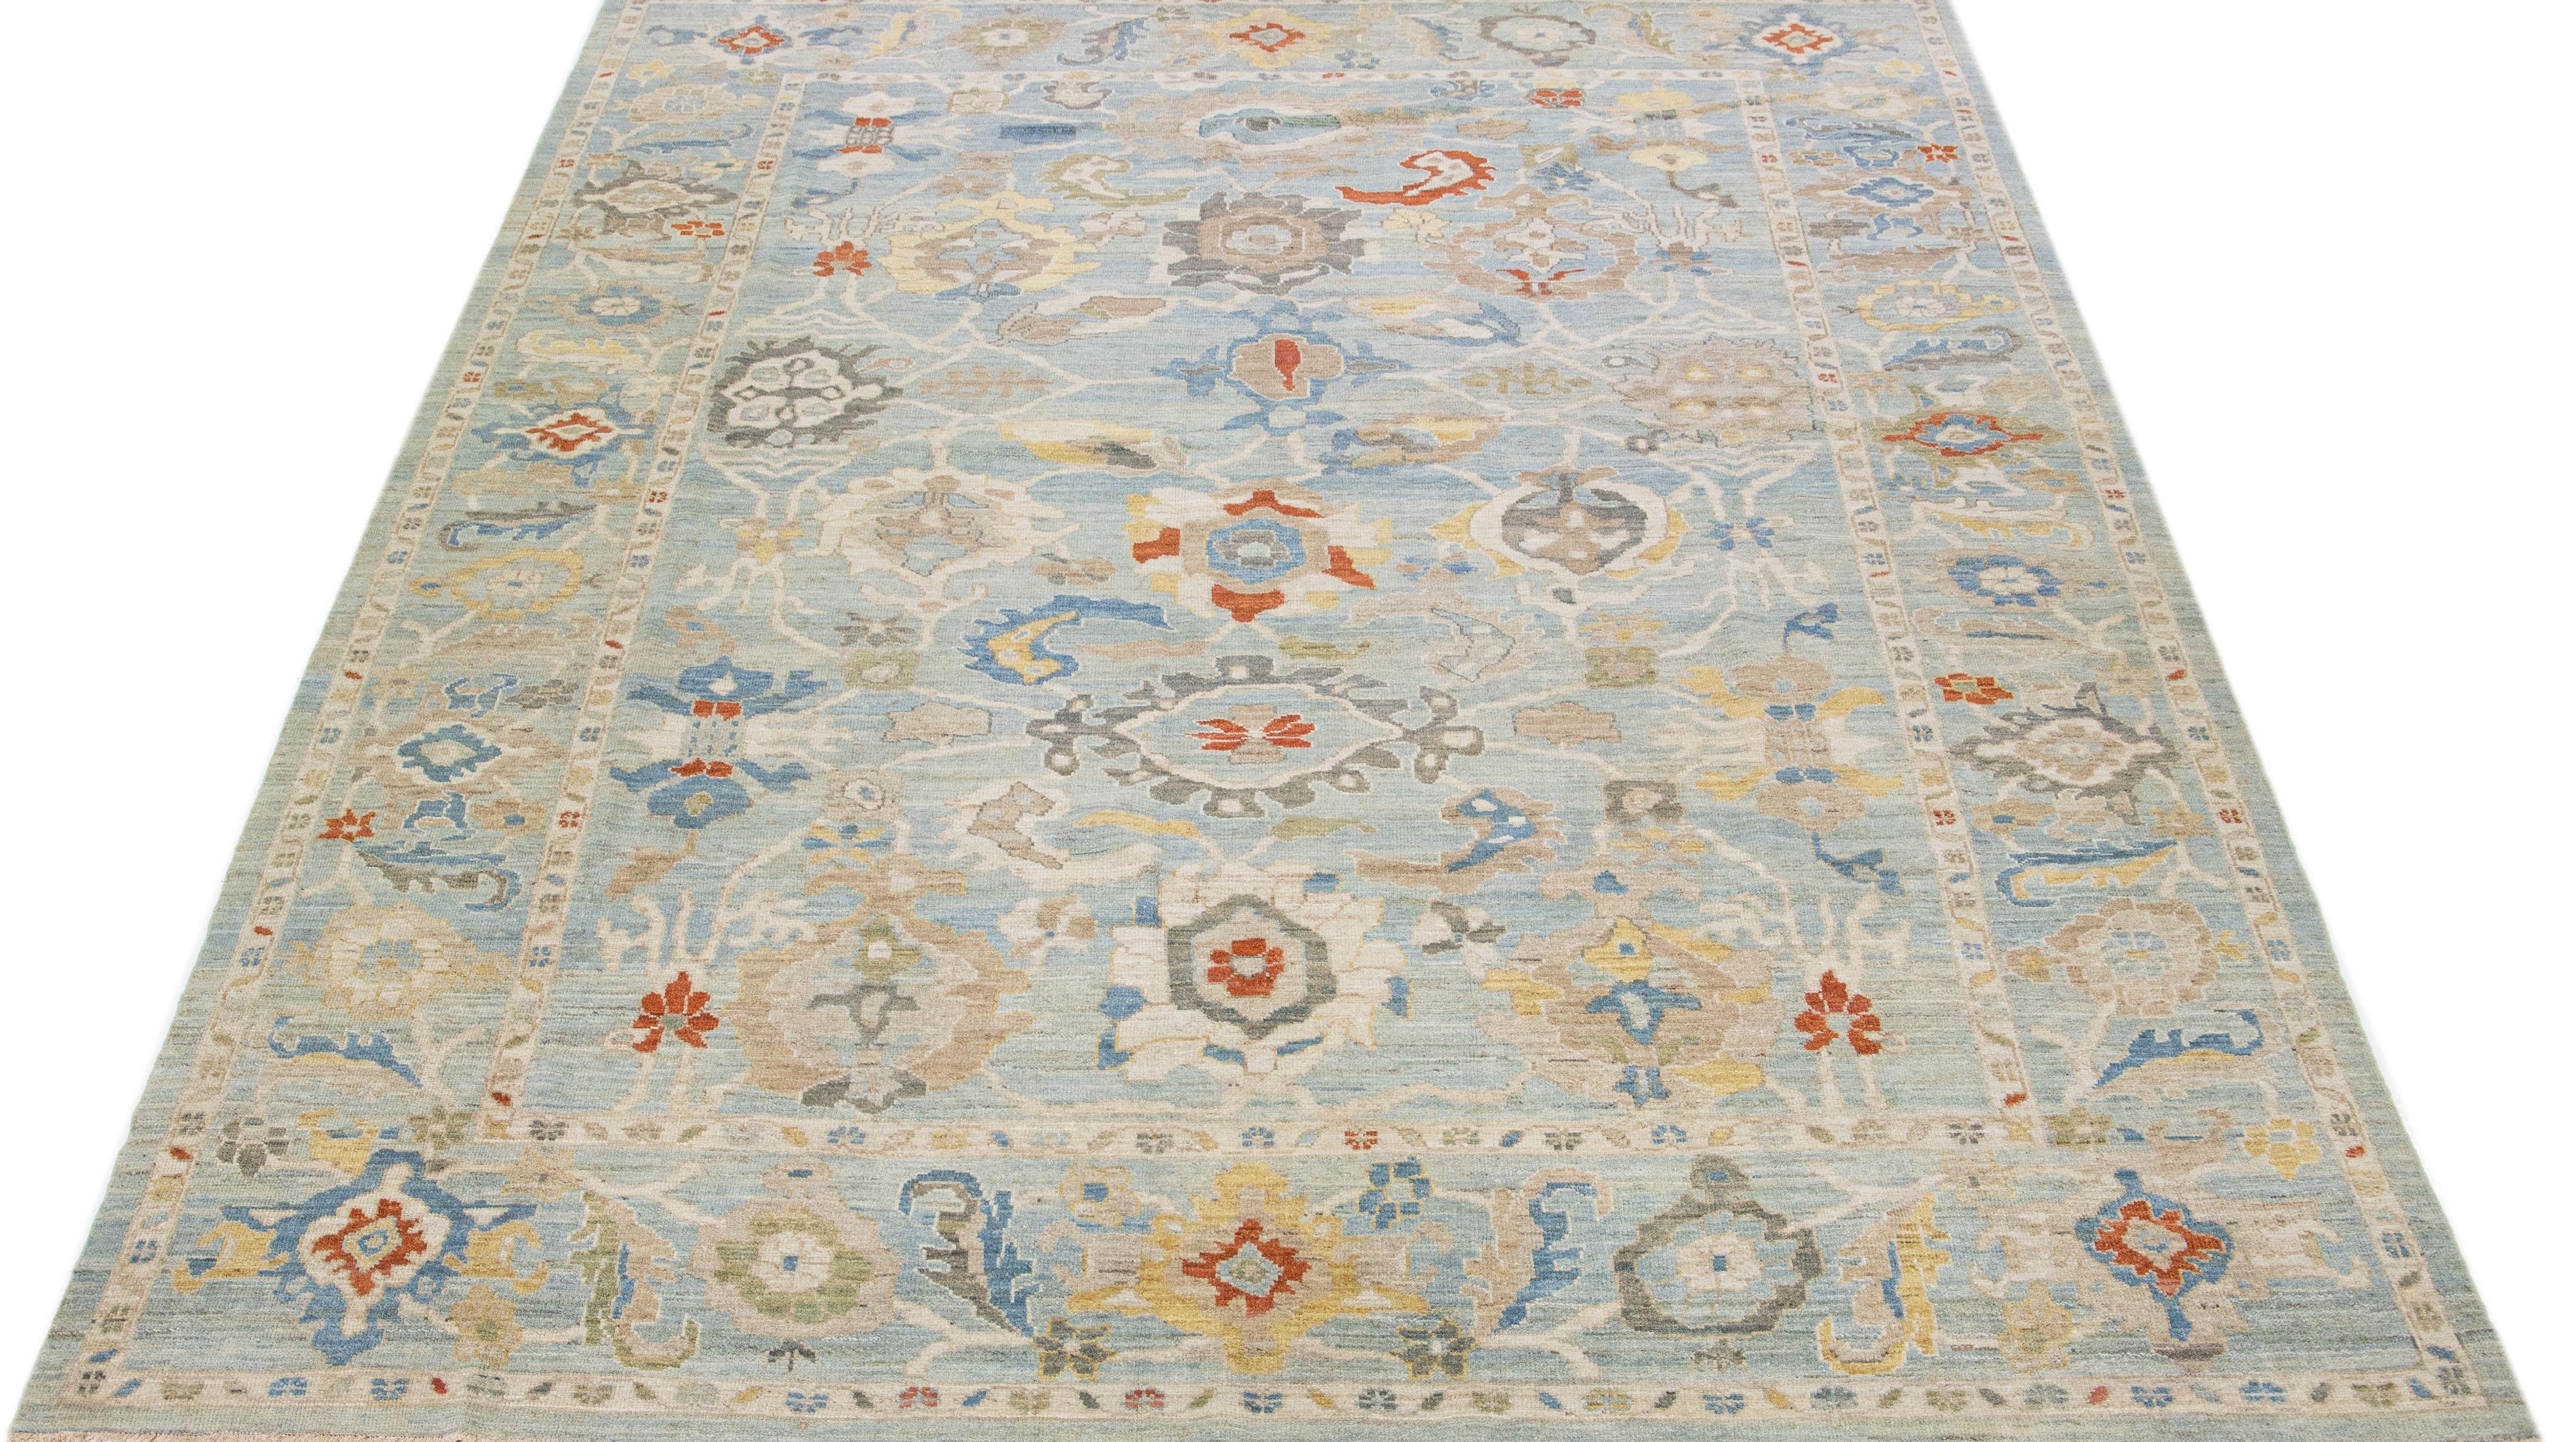 Beautiful modern Sultanabad hand-knotted wool rug with a blue color field. This rug has a designed frame with beige, yellow, and rust accents in a gorgeous all-over floral motif.

This rug measures: 10'2